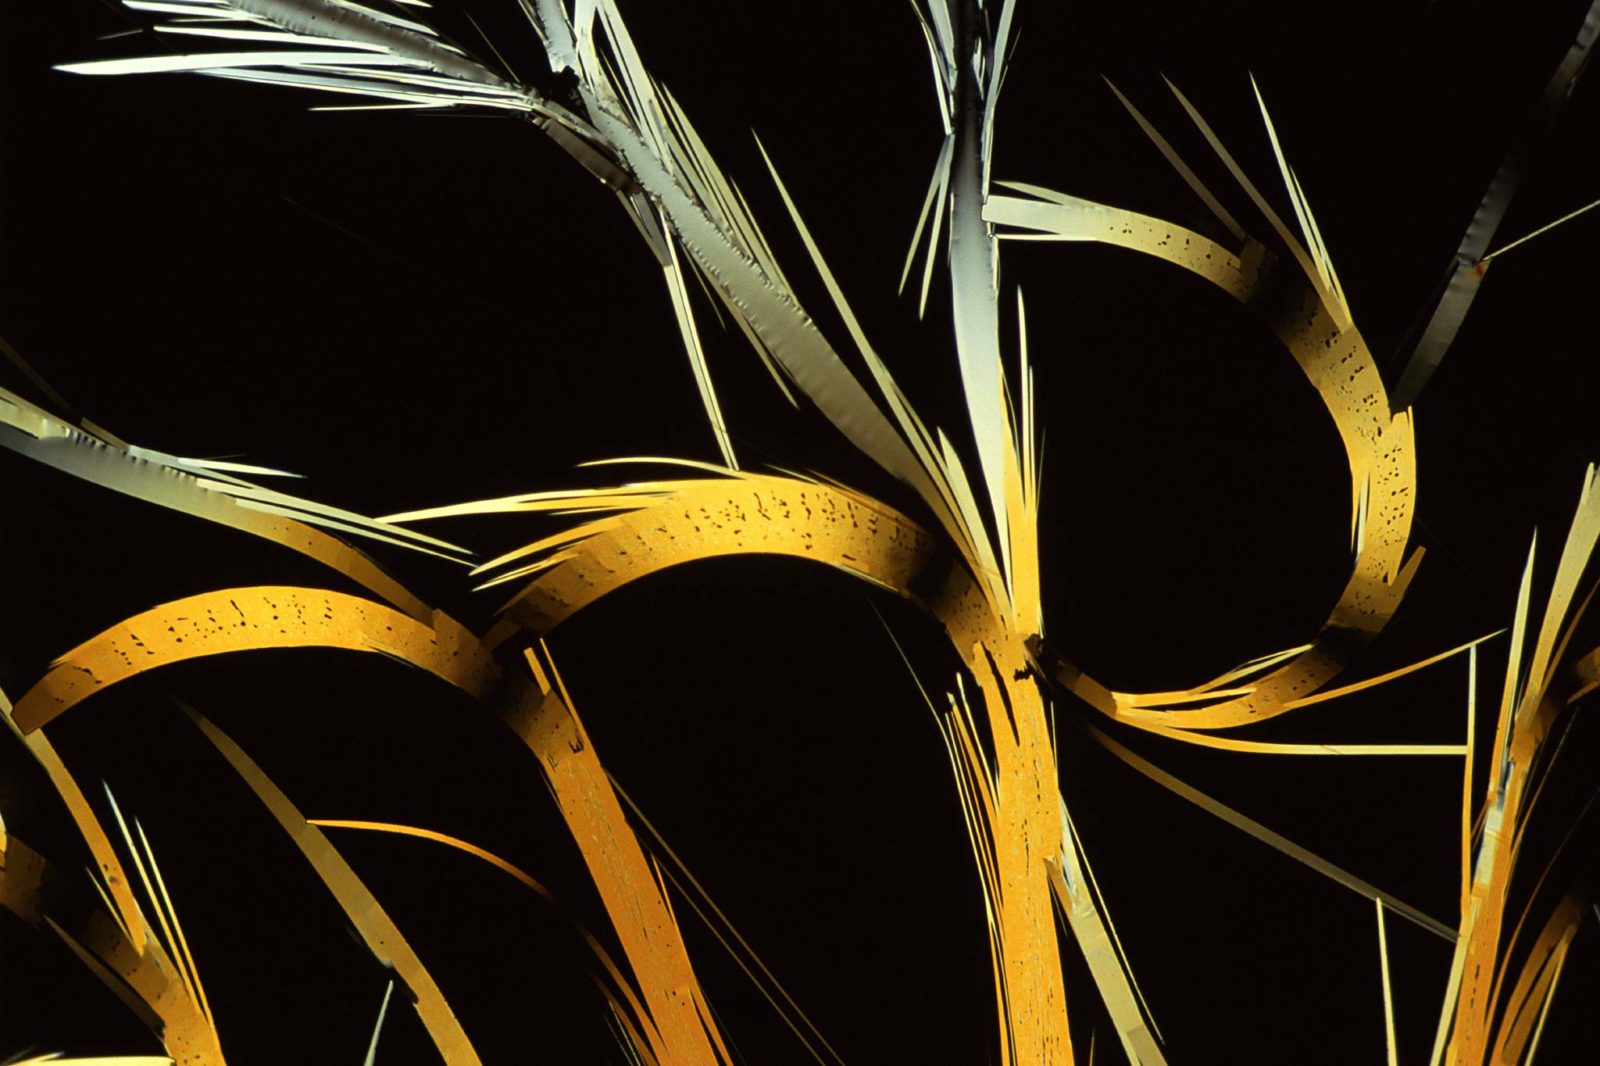 Ed Gafford's microscopic photo of re-crystalized sulfur.